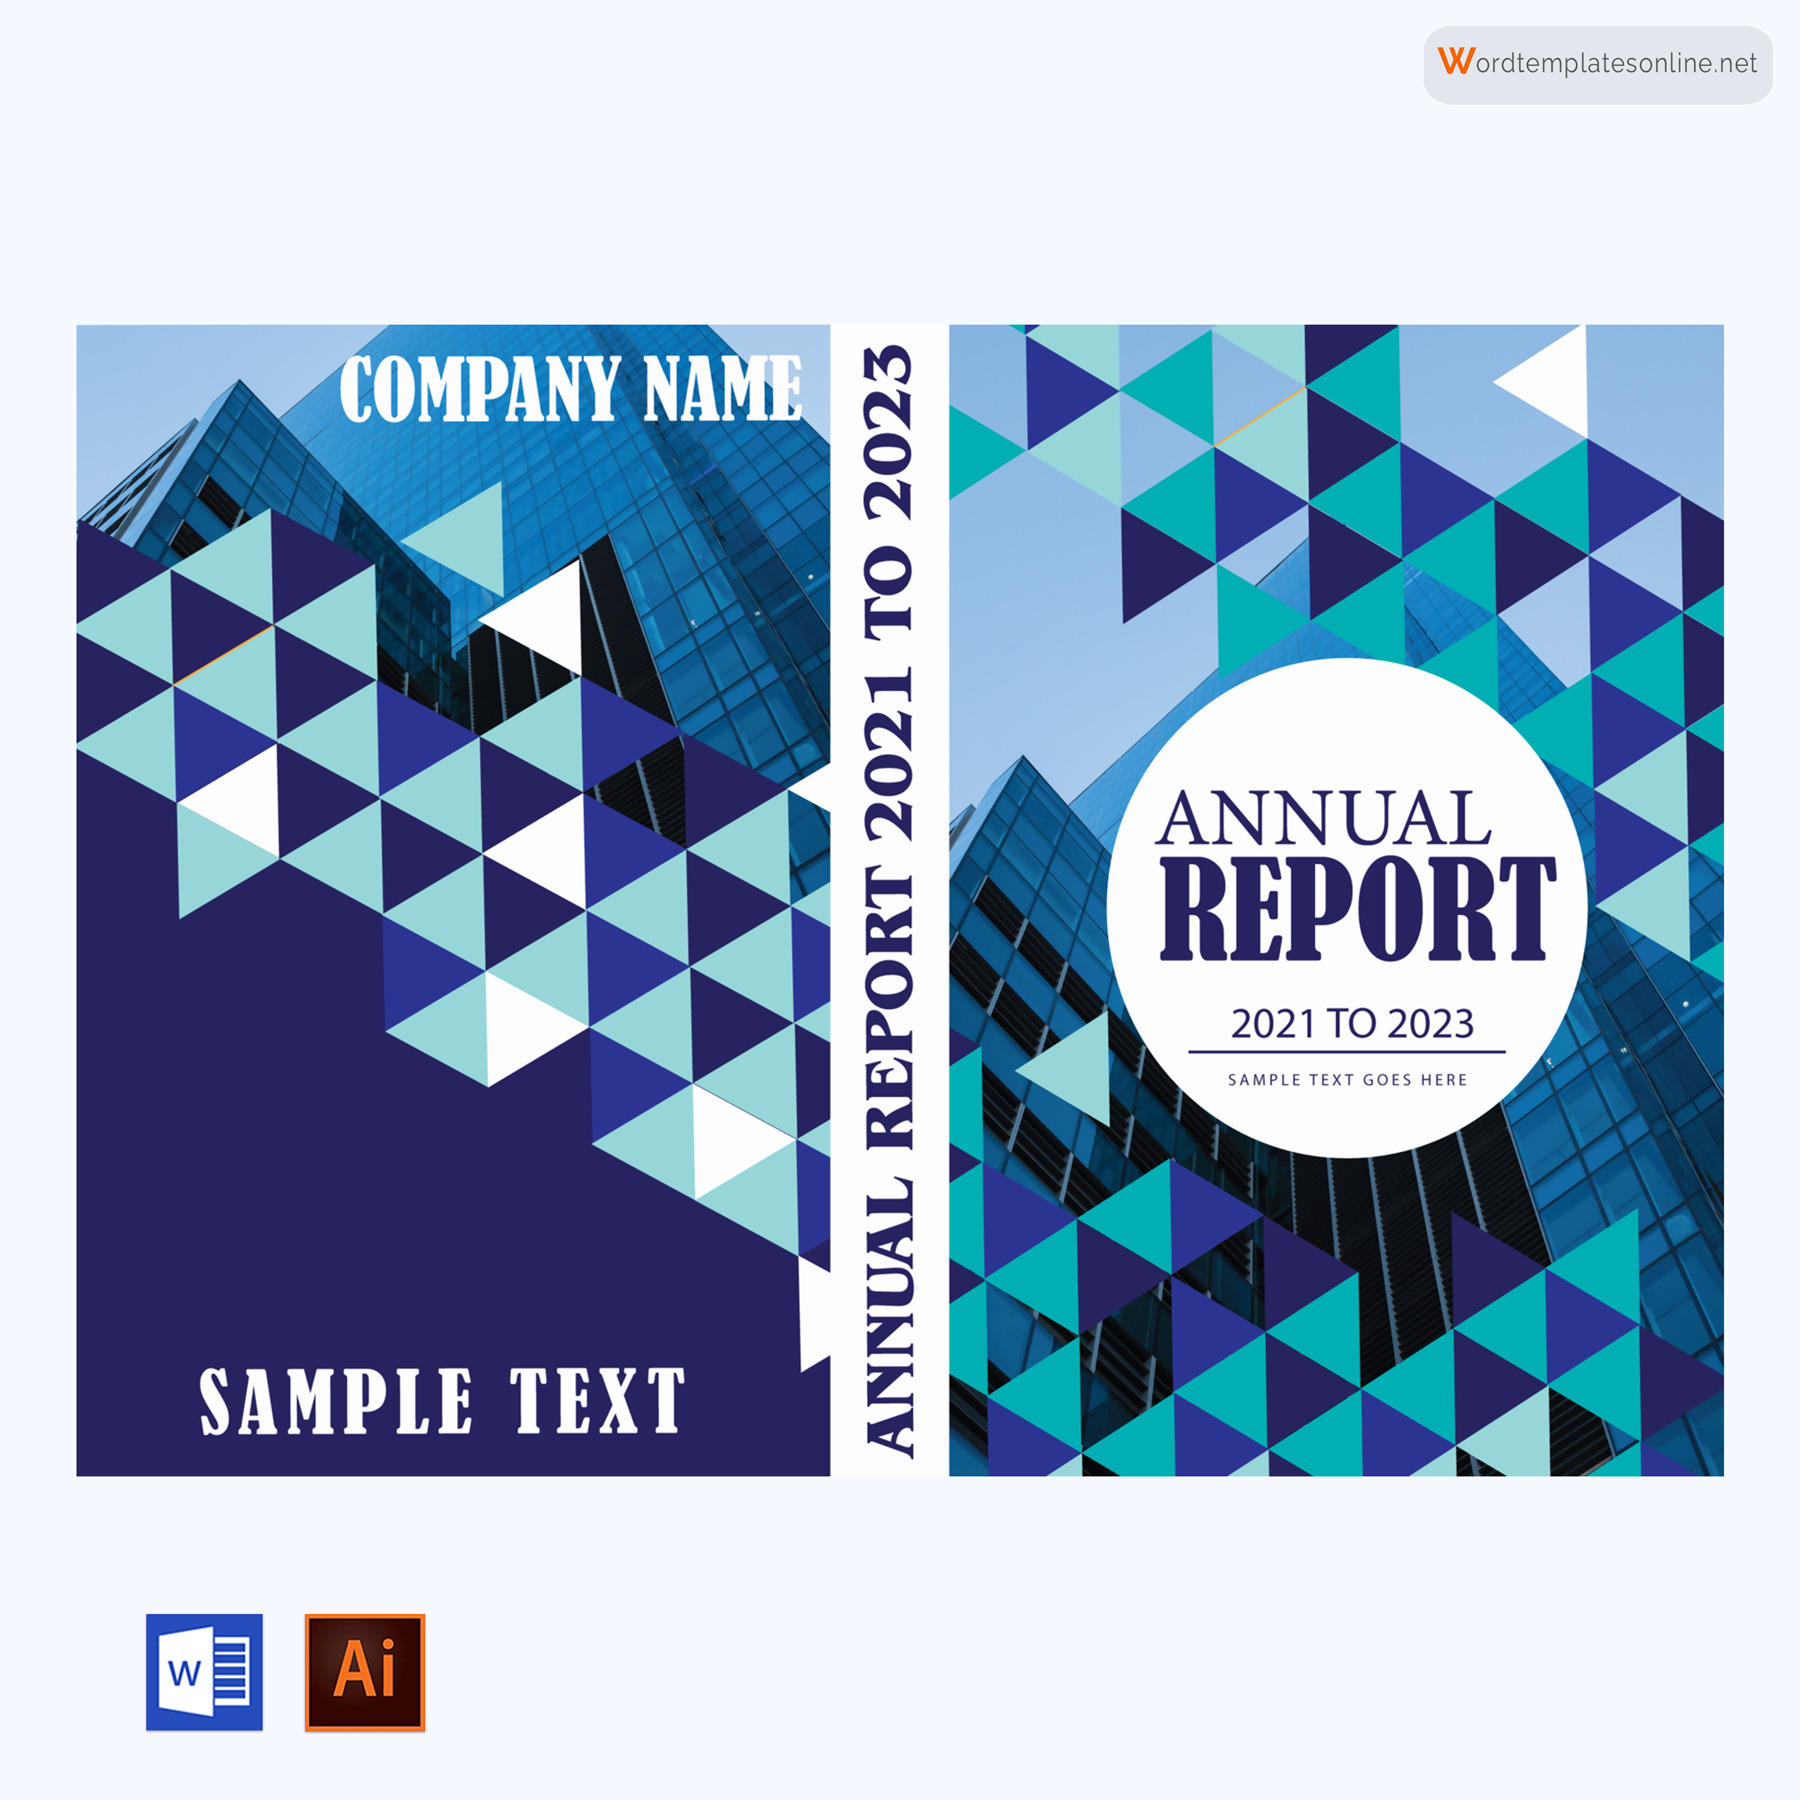 Free Sample Annual Report 2021 to 2023 Template in Word and Illustrator